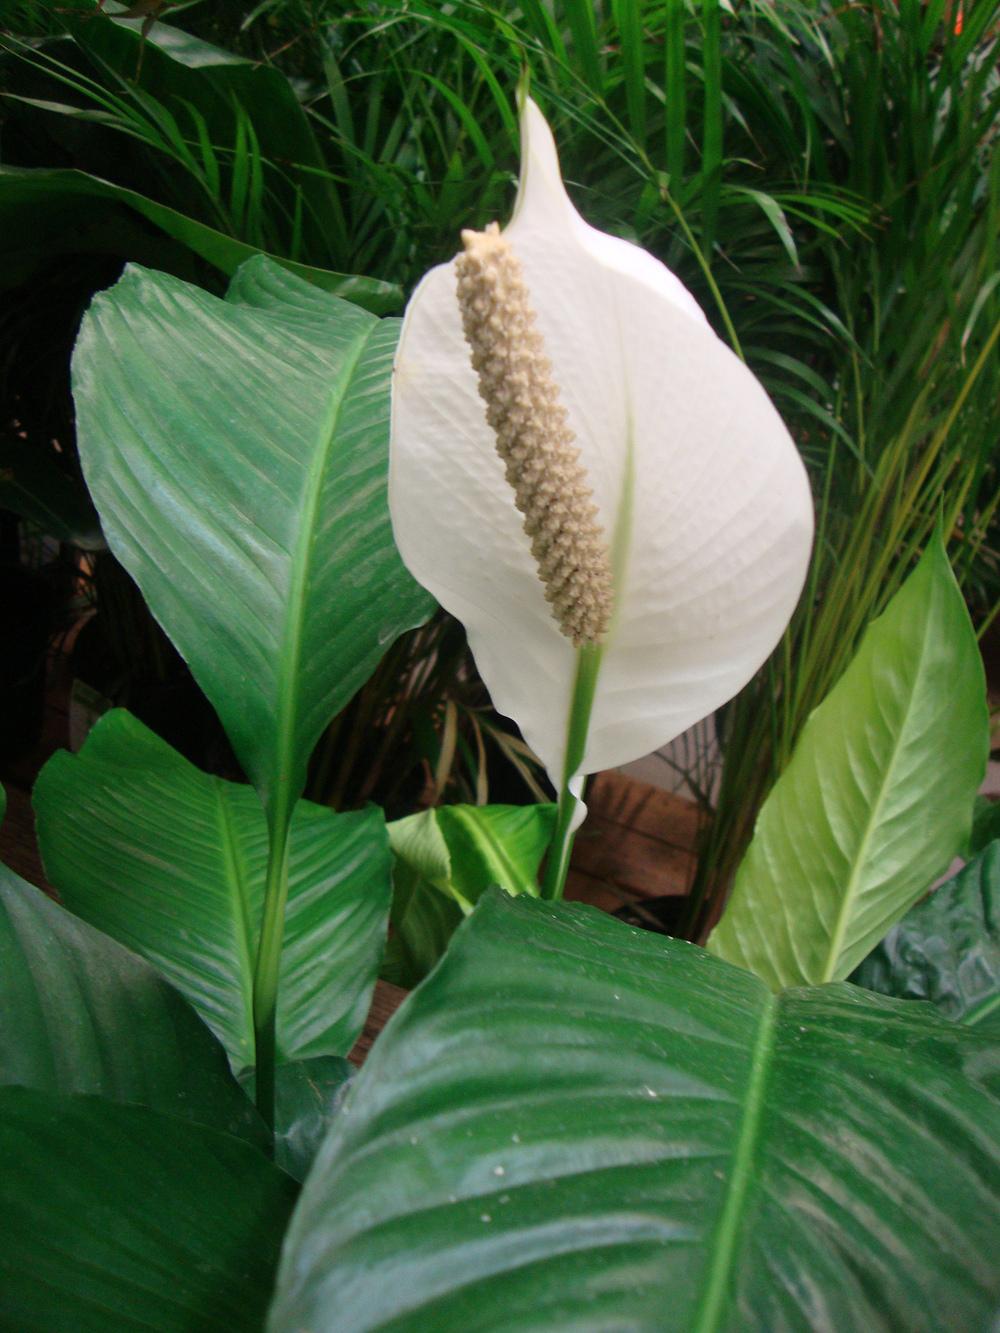 Photo of Peace Lilies (Spathiphyllum) uploaded by Paul2032